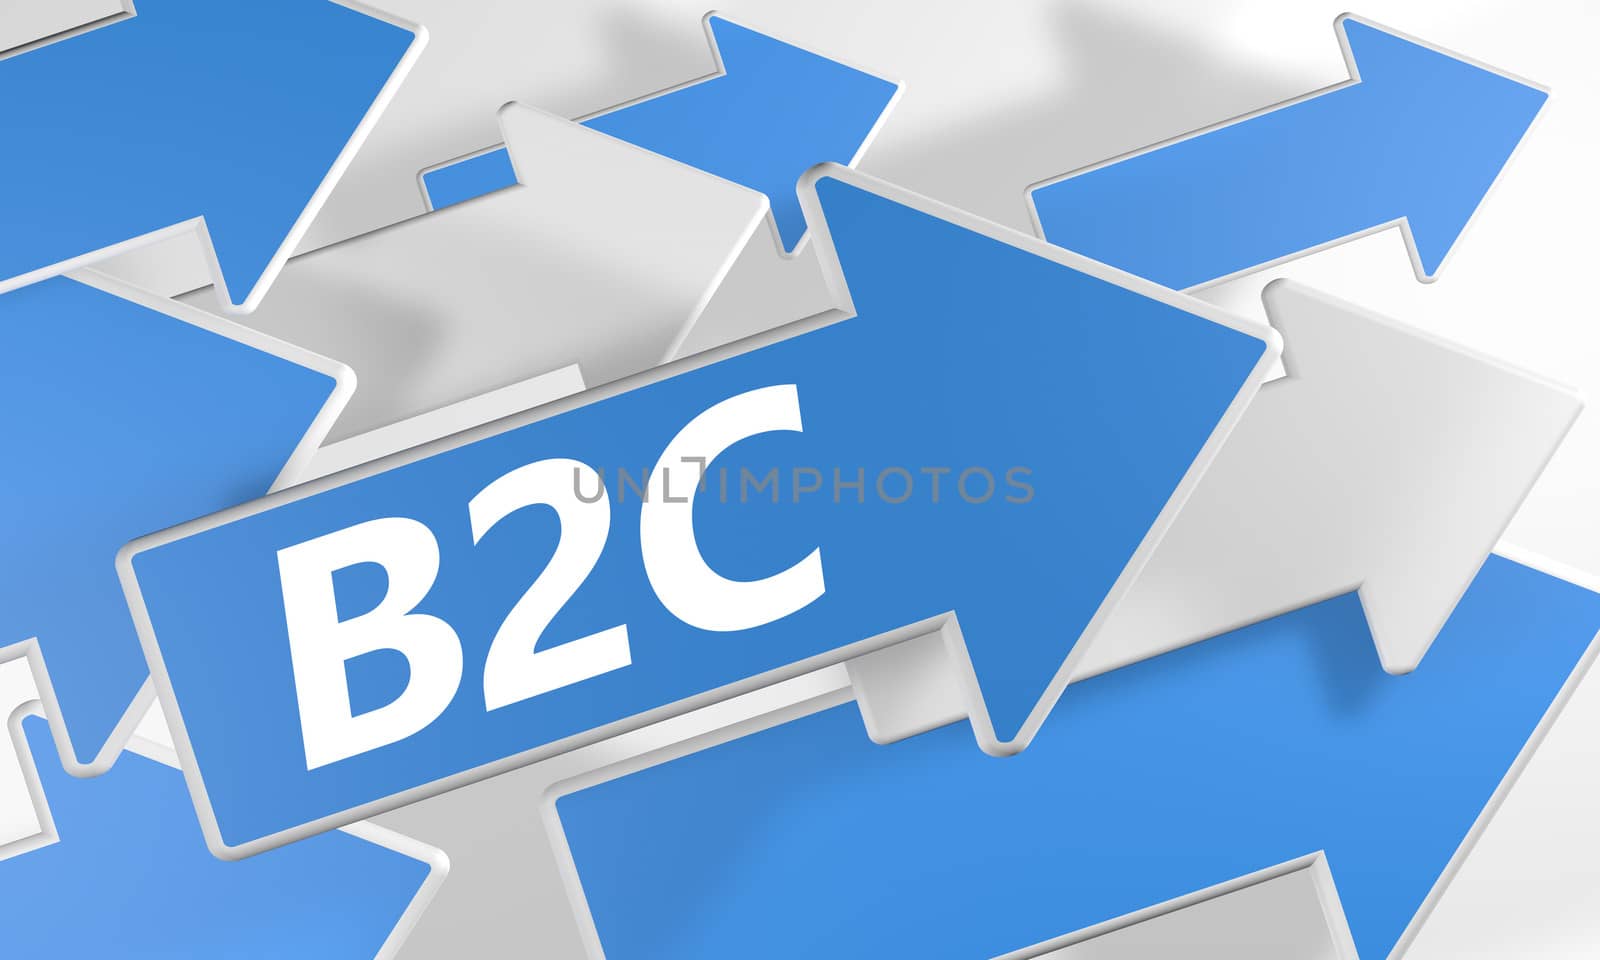 Business 2 Customer 3d render concept with blue and white arrows flying over a white background.